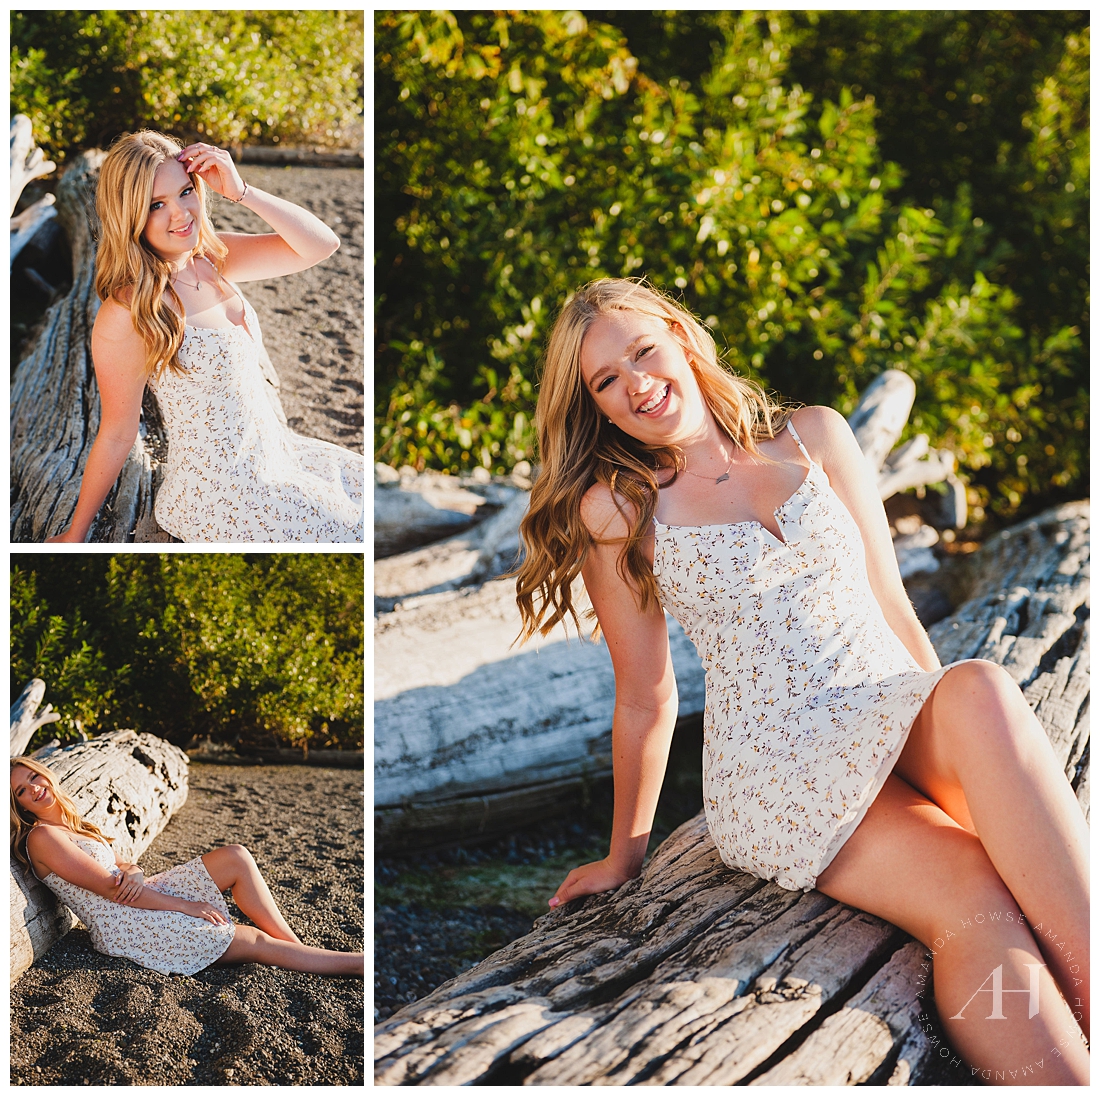 High School Senior Portrait Session in Gig Harbor on Beach with Driftwood photographed by Tacoma Senior Photographer Amanda Howse